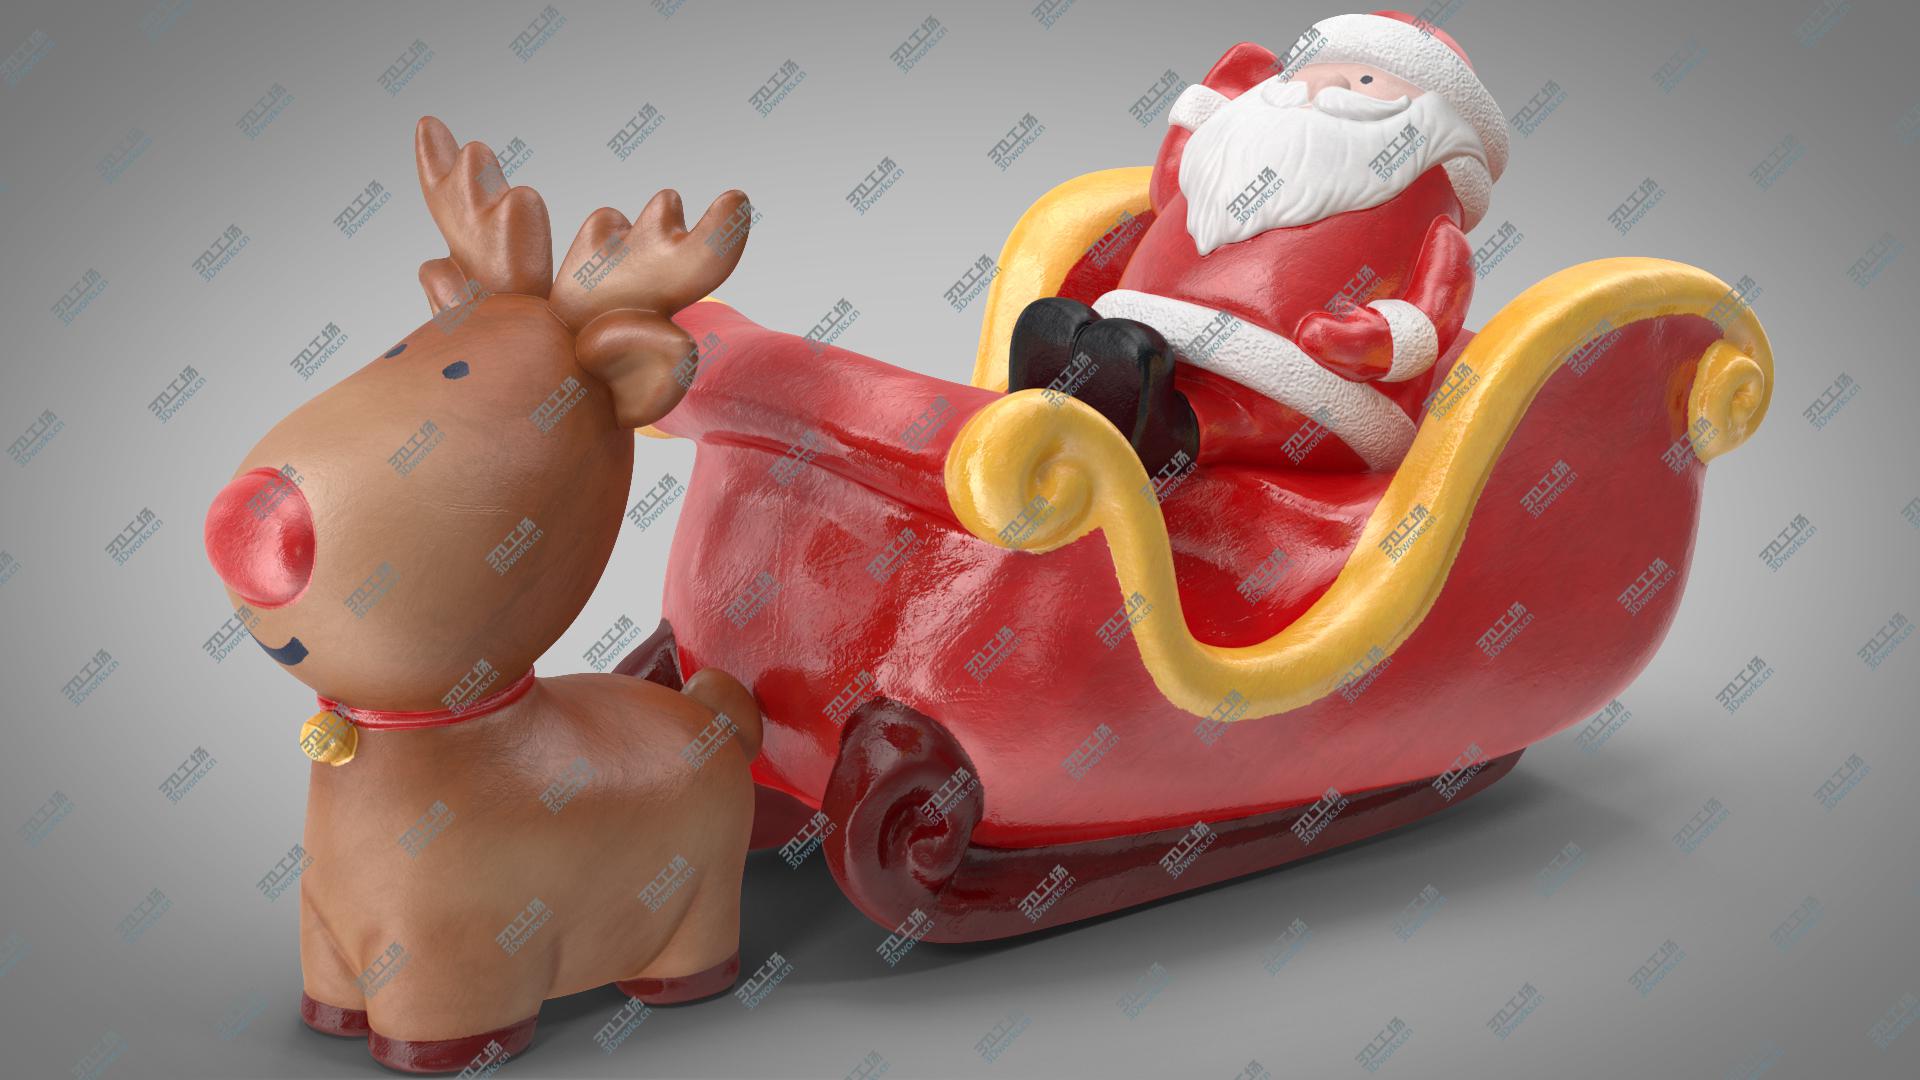 images/goods_img/202105071/Santa Claus with Sleigh Decorative Figurine 3 3D/3.jpg